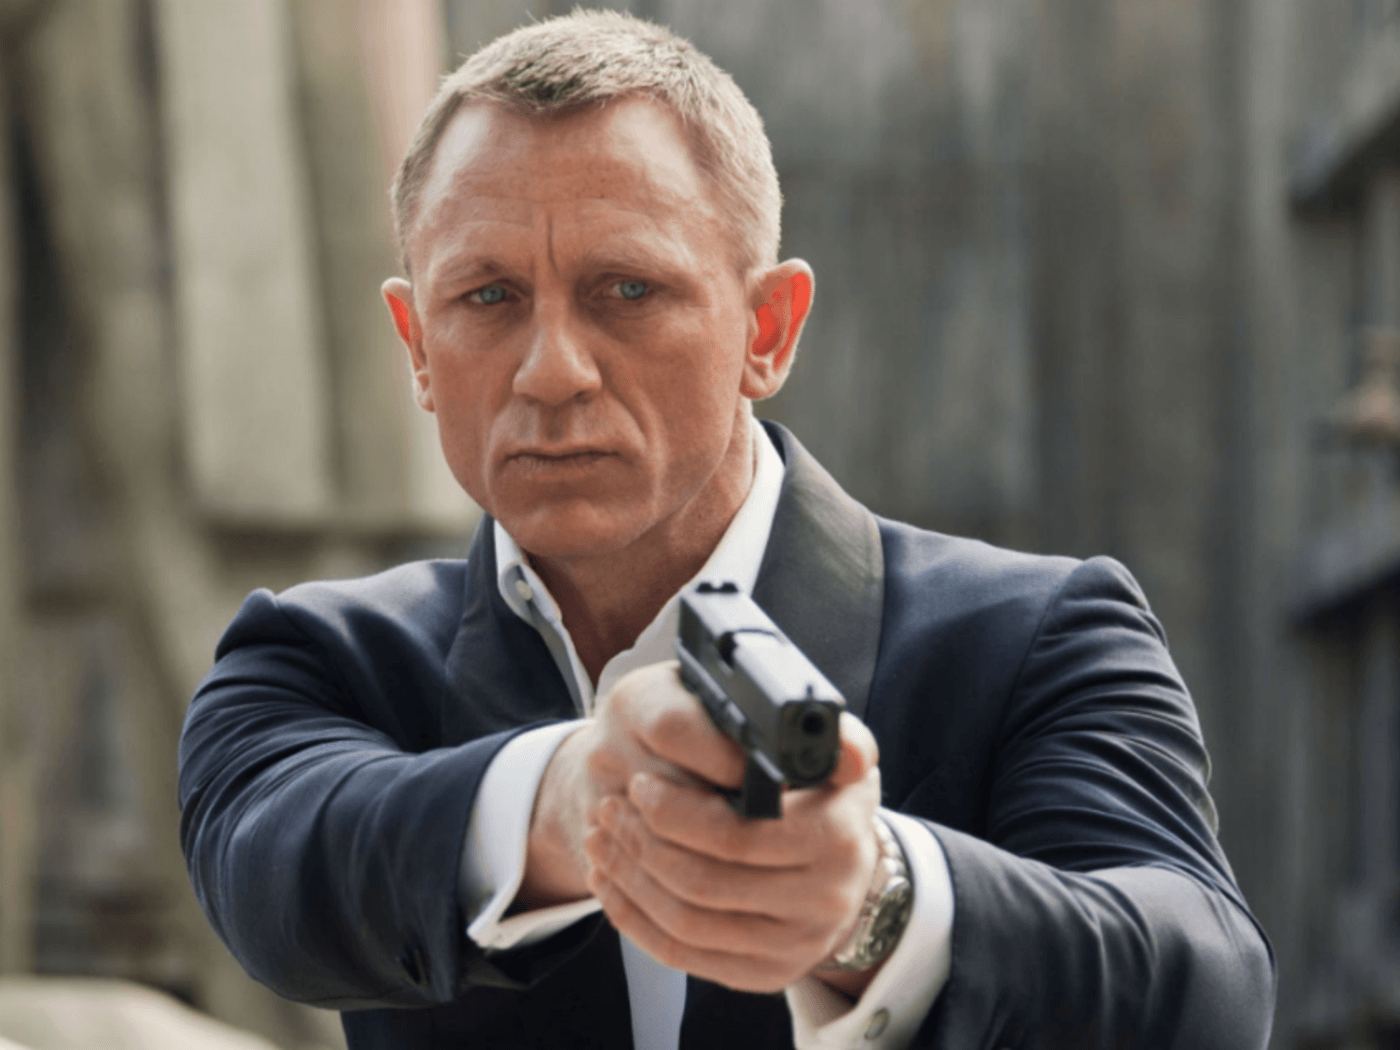 Daniel Craig confirms 007 exit after 'No Time To Die' and says he